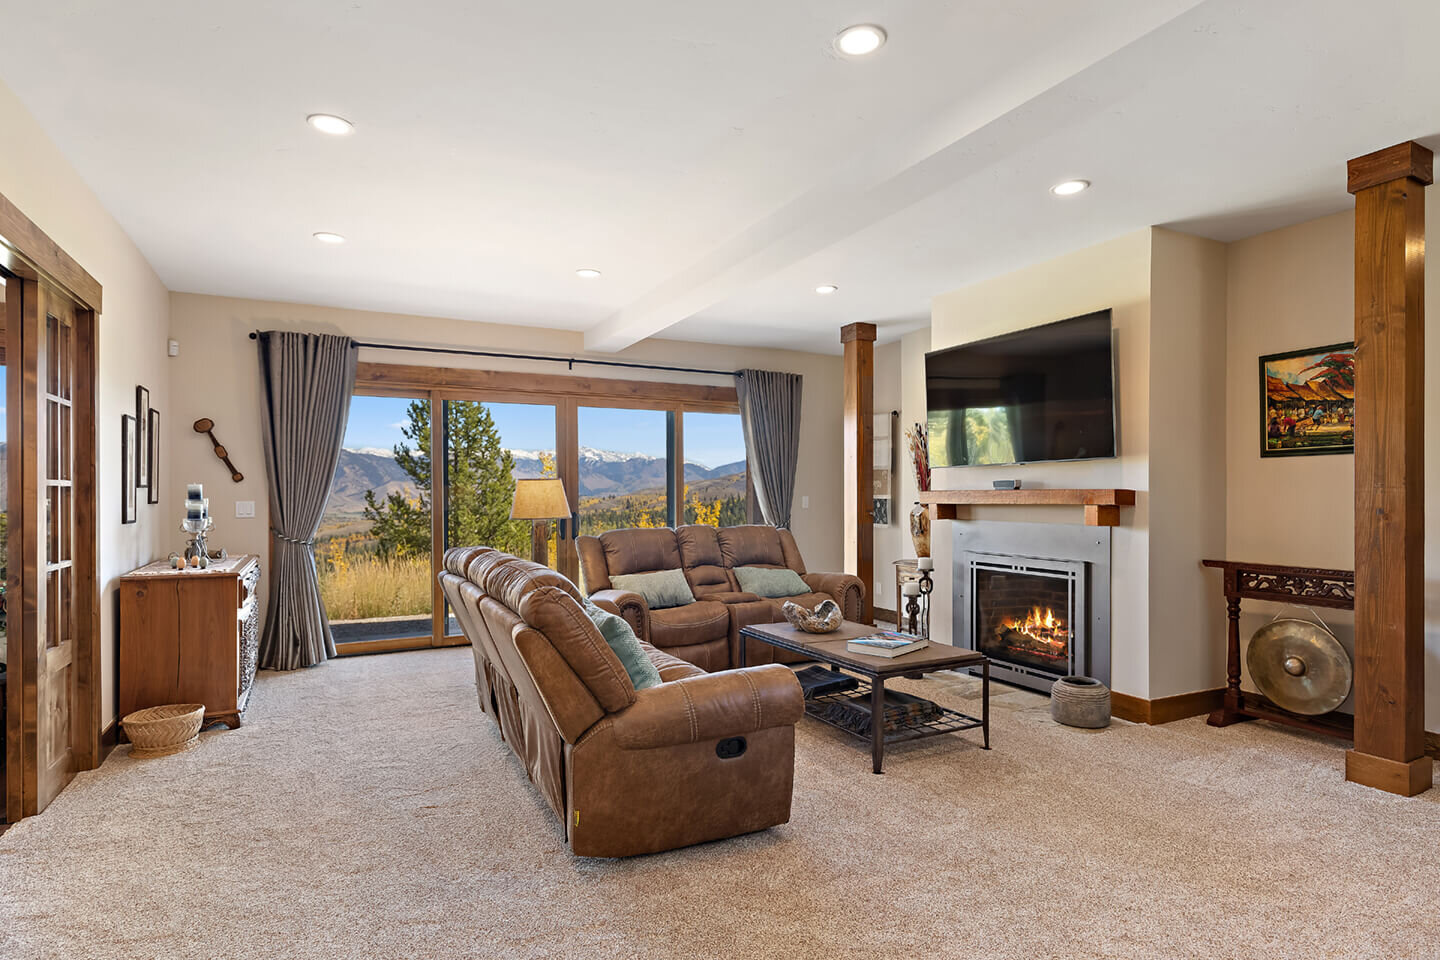 Family room with large windows and fireplace